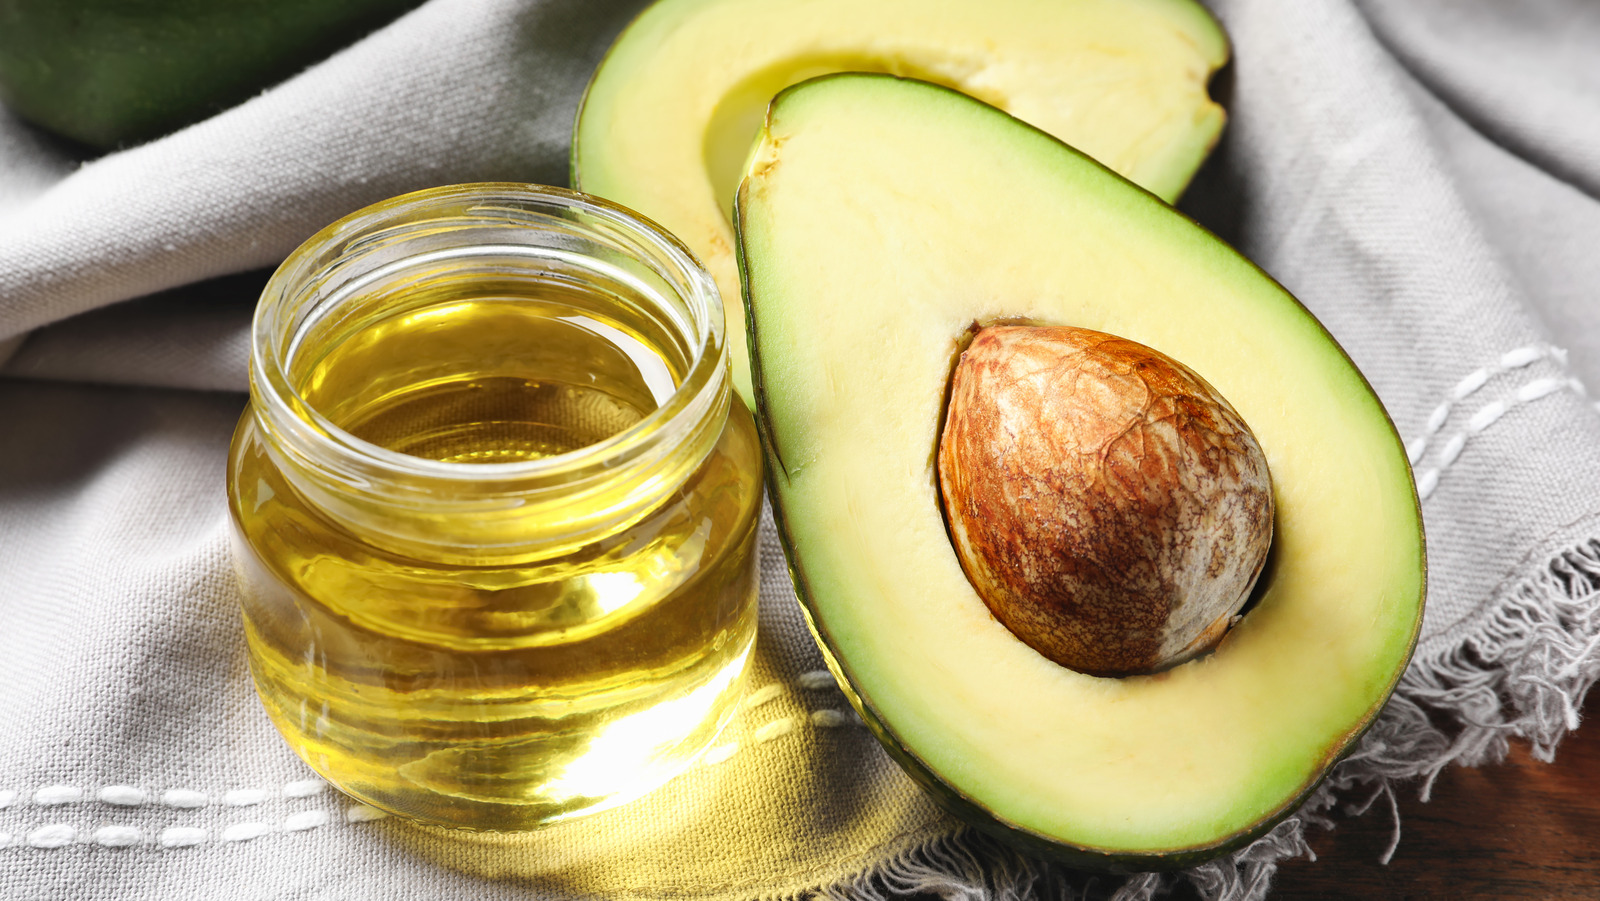 https://www.tastingtable.com/img/gallery/the-unique-way-avocado-oil-is-produced/l-intro-1663013956.jpg